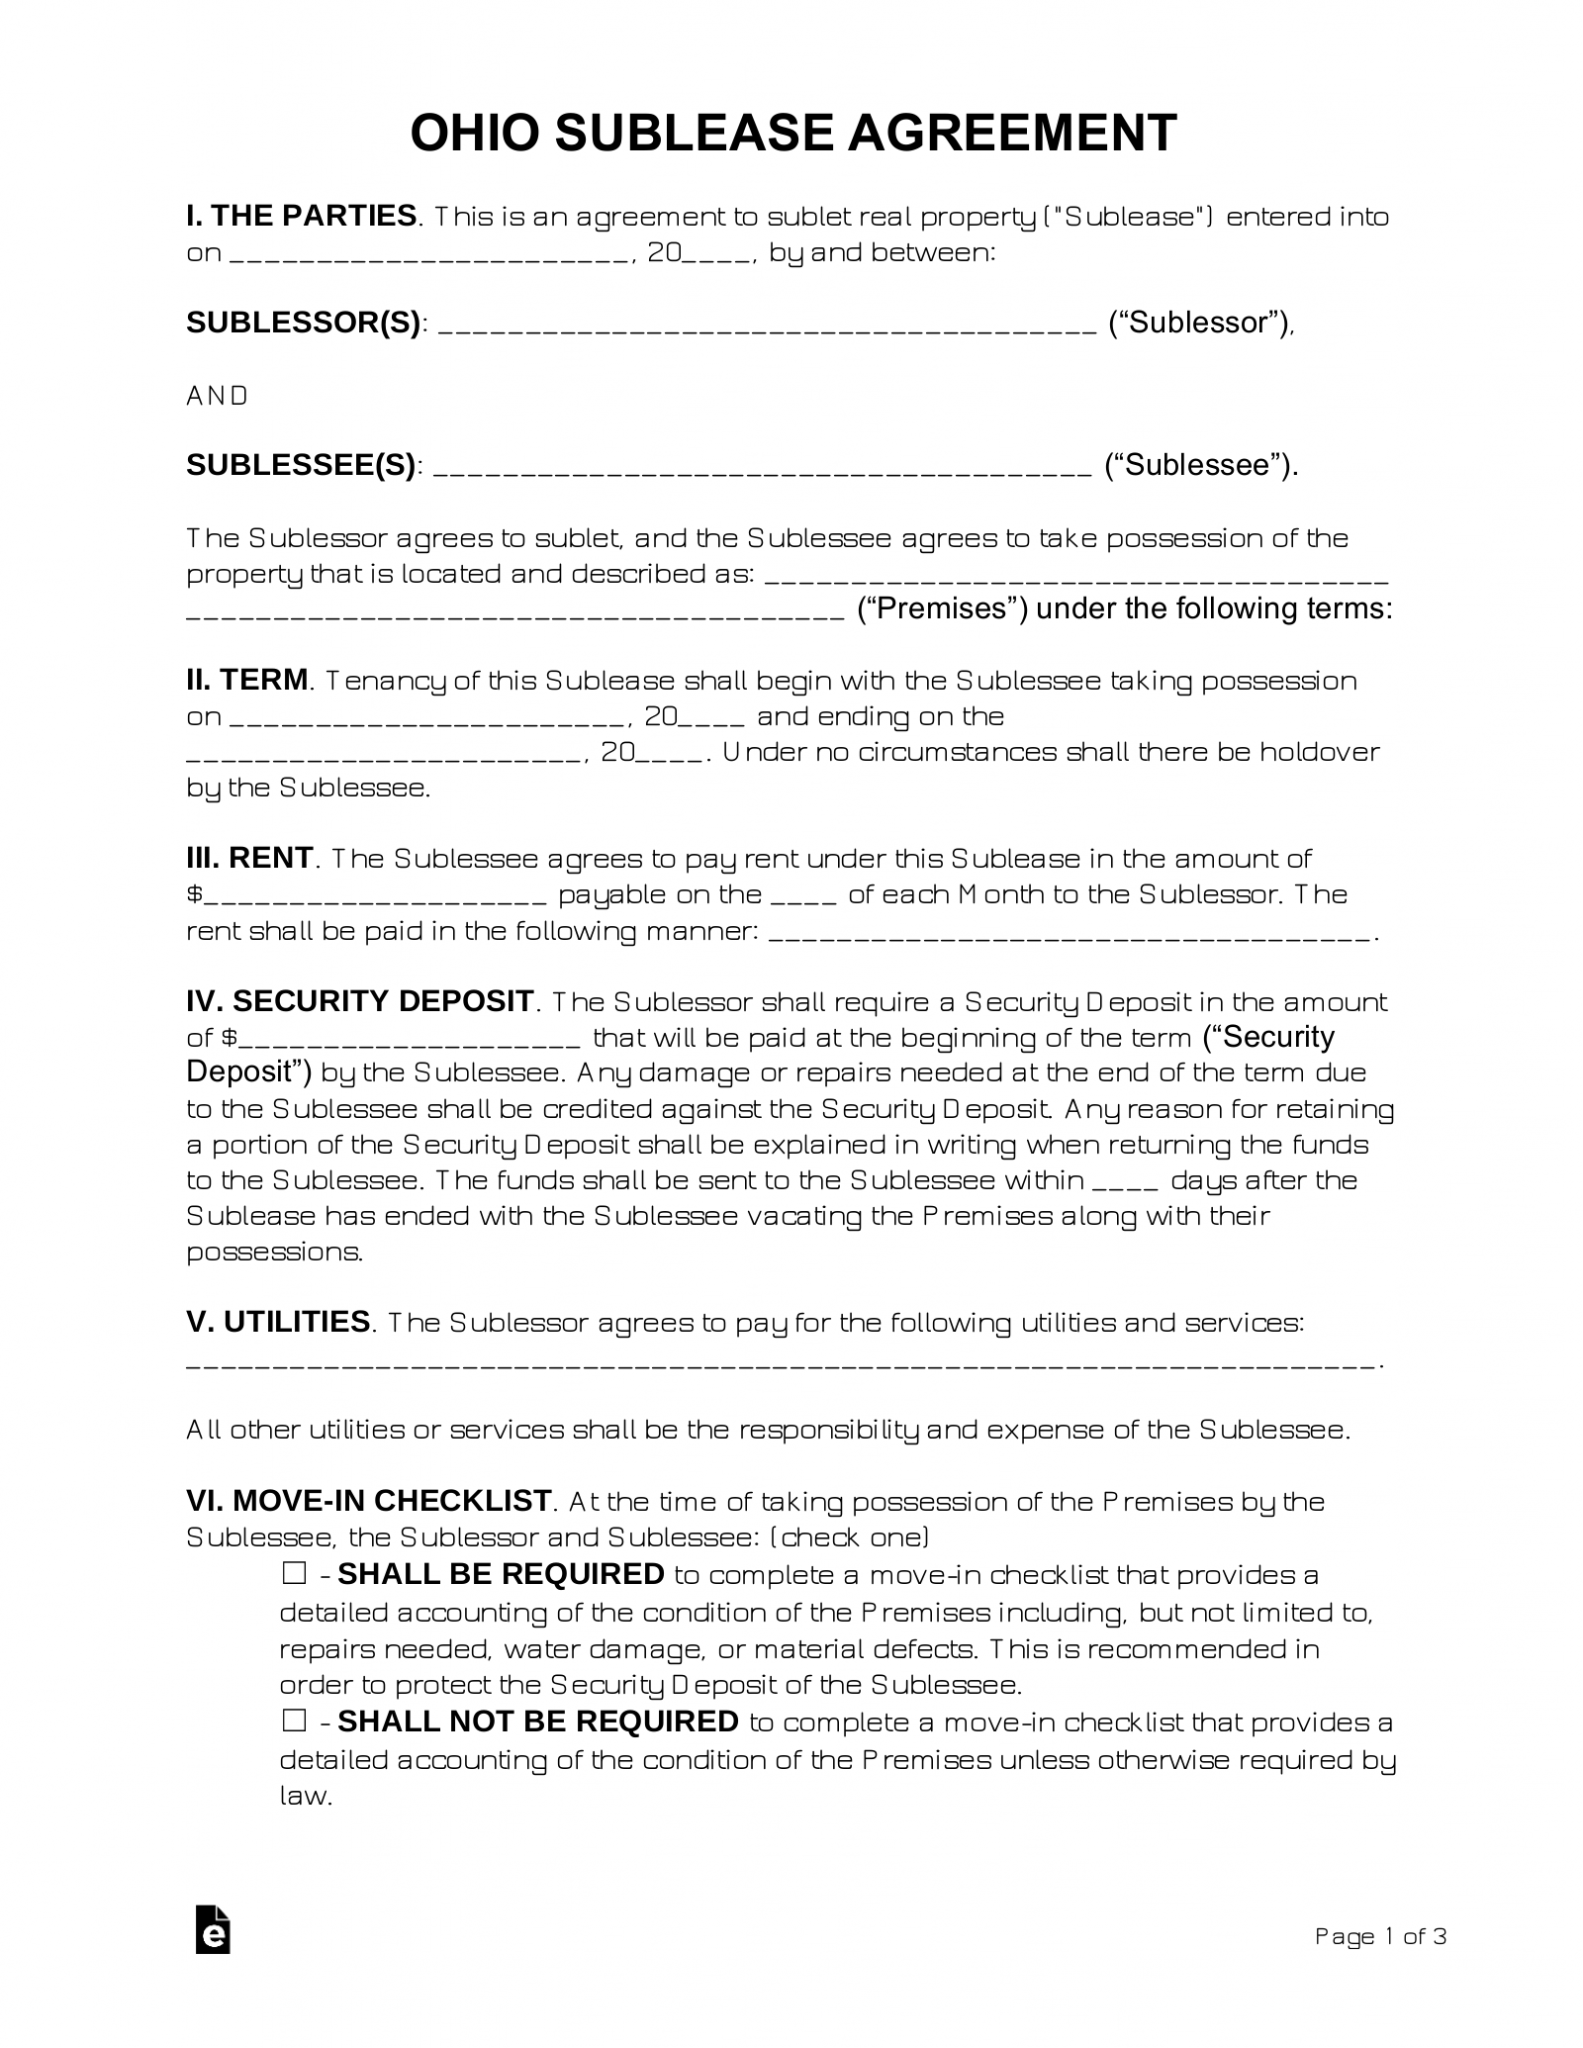 free-ohio-sublease-agreement-template-pdf-word-eforms